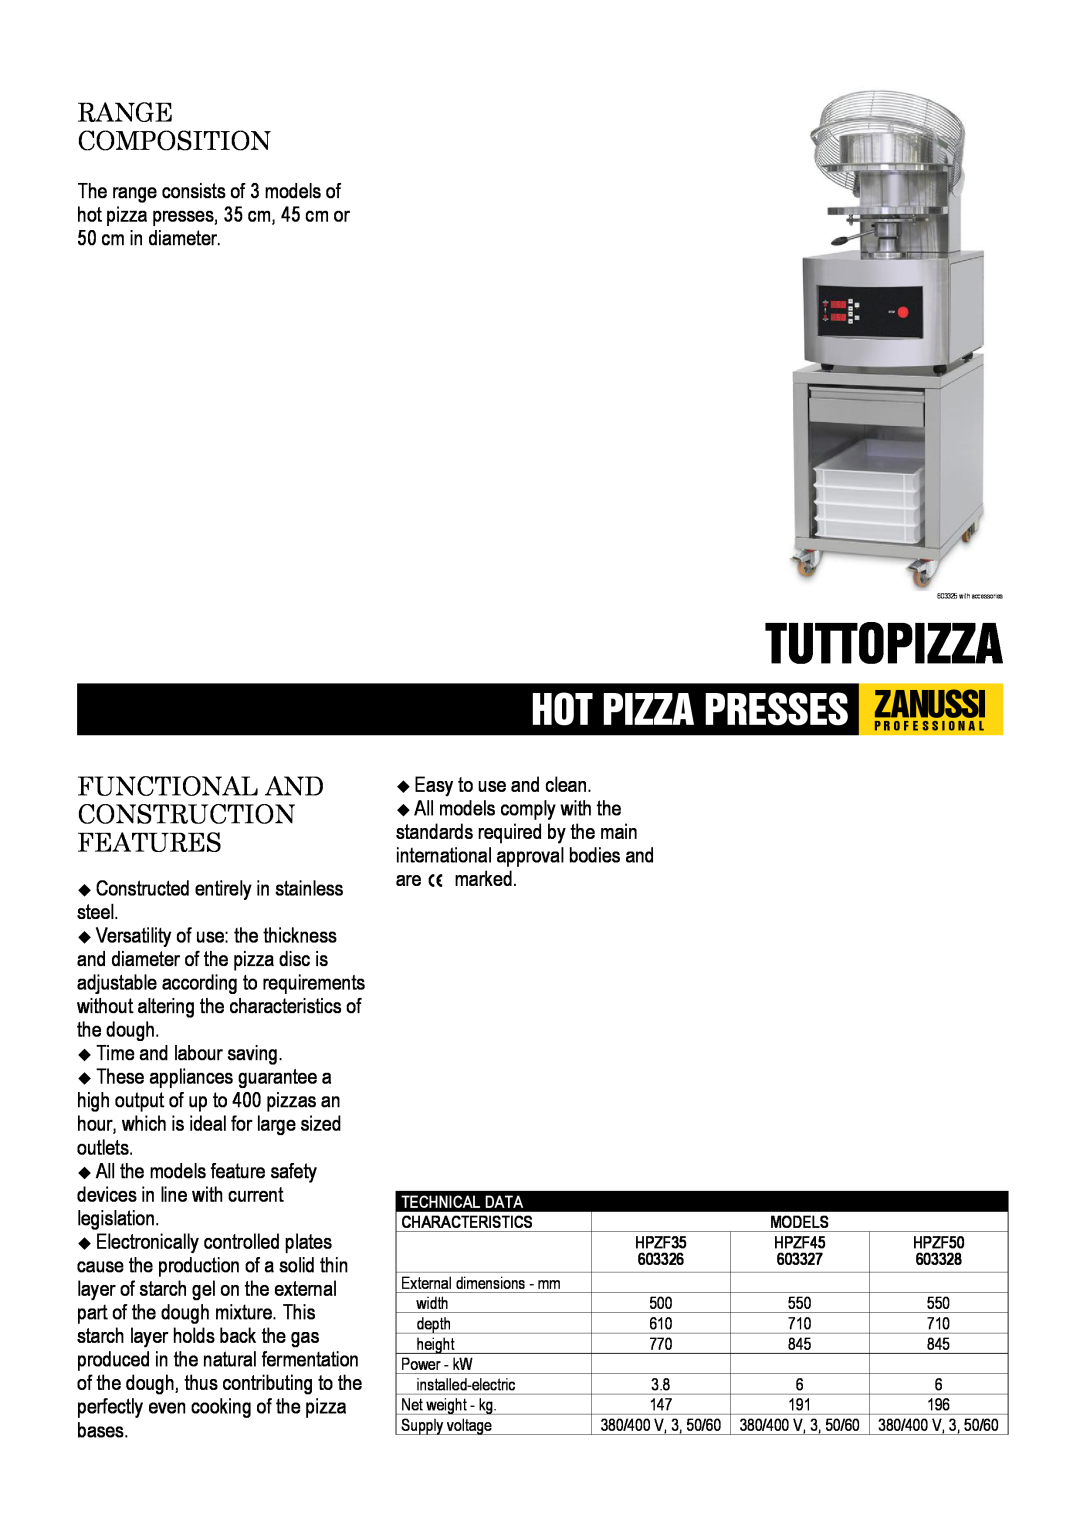 Zanussi 603326, 603328, 603327, HPZF50, HPZF35 dimensions Tuttopizza, Range Composition, Functional And Construction Features 